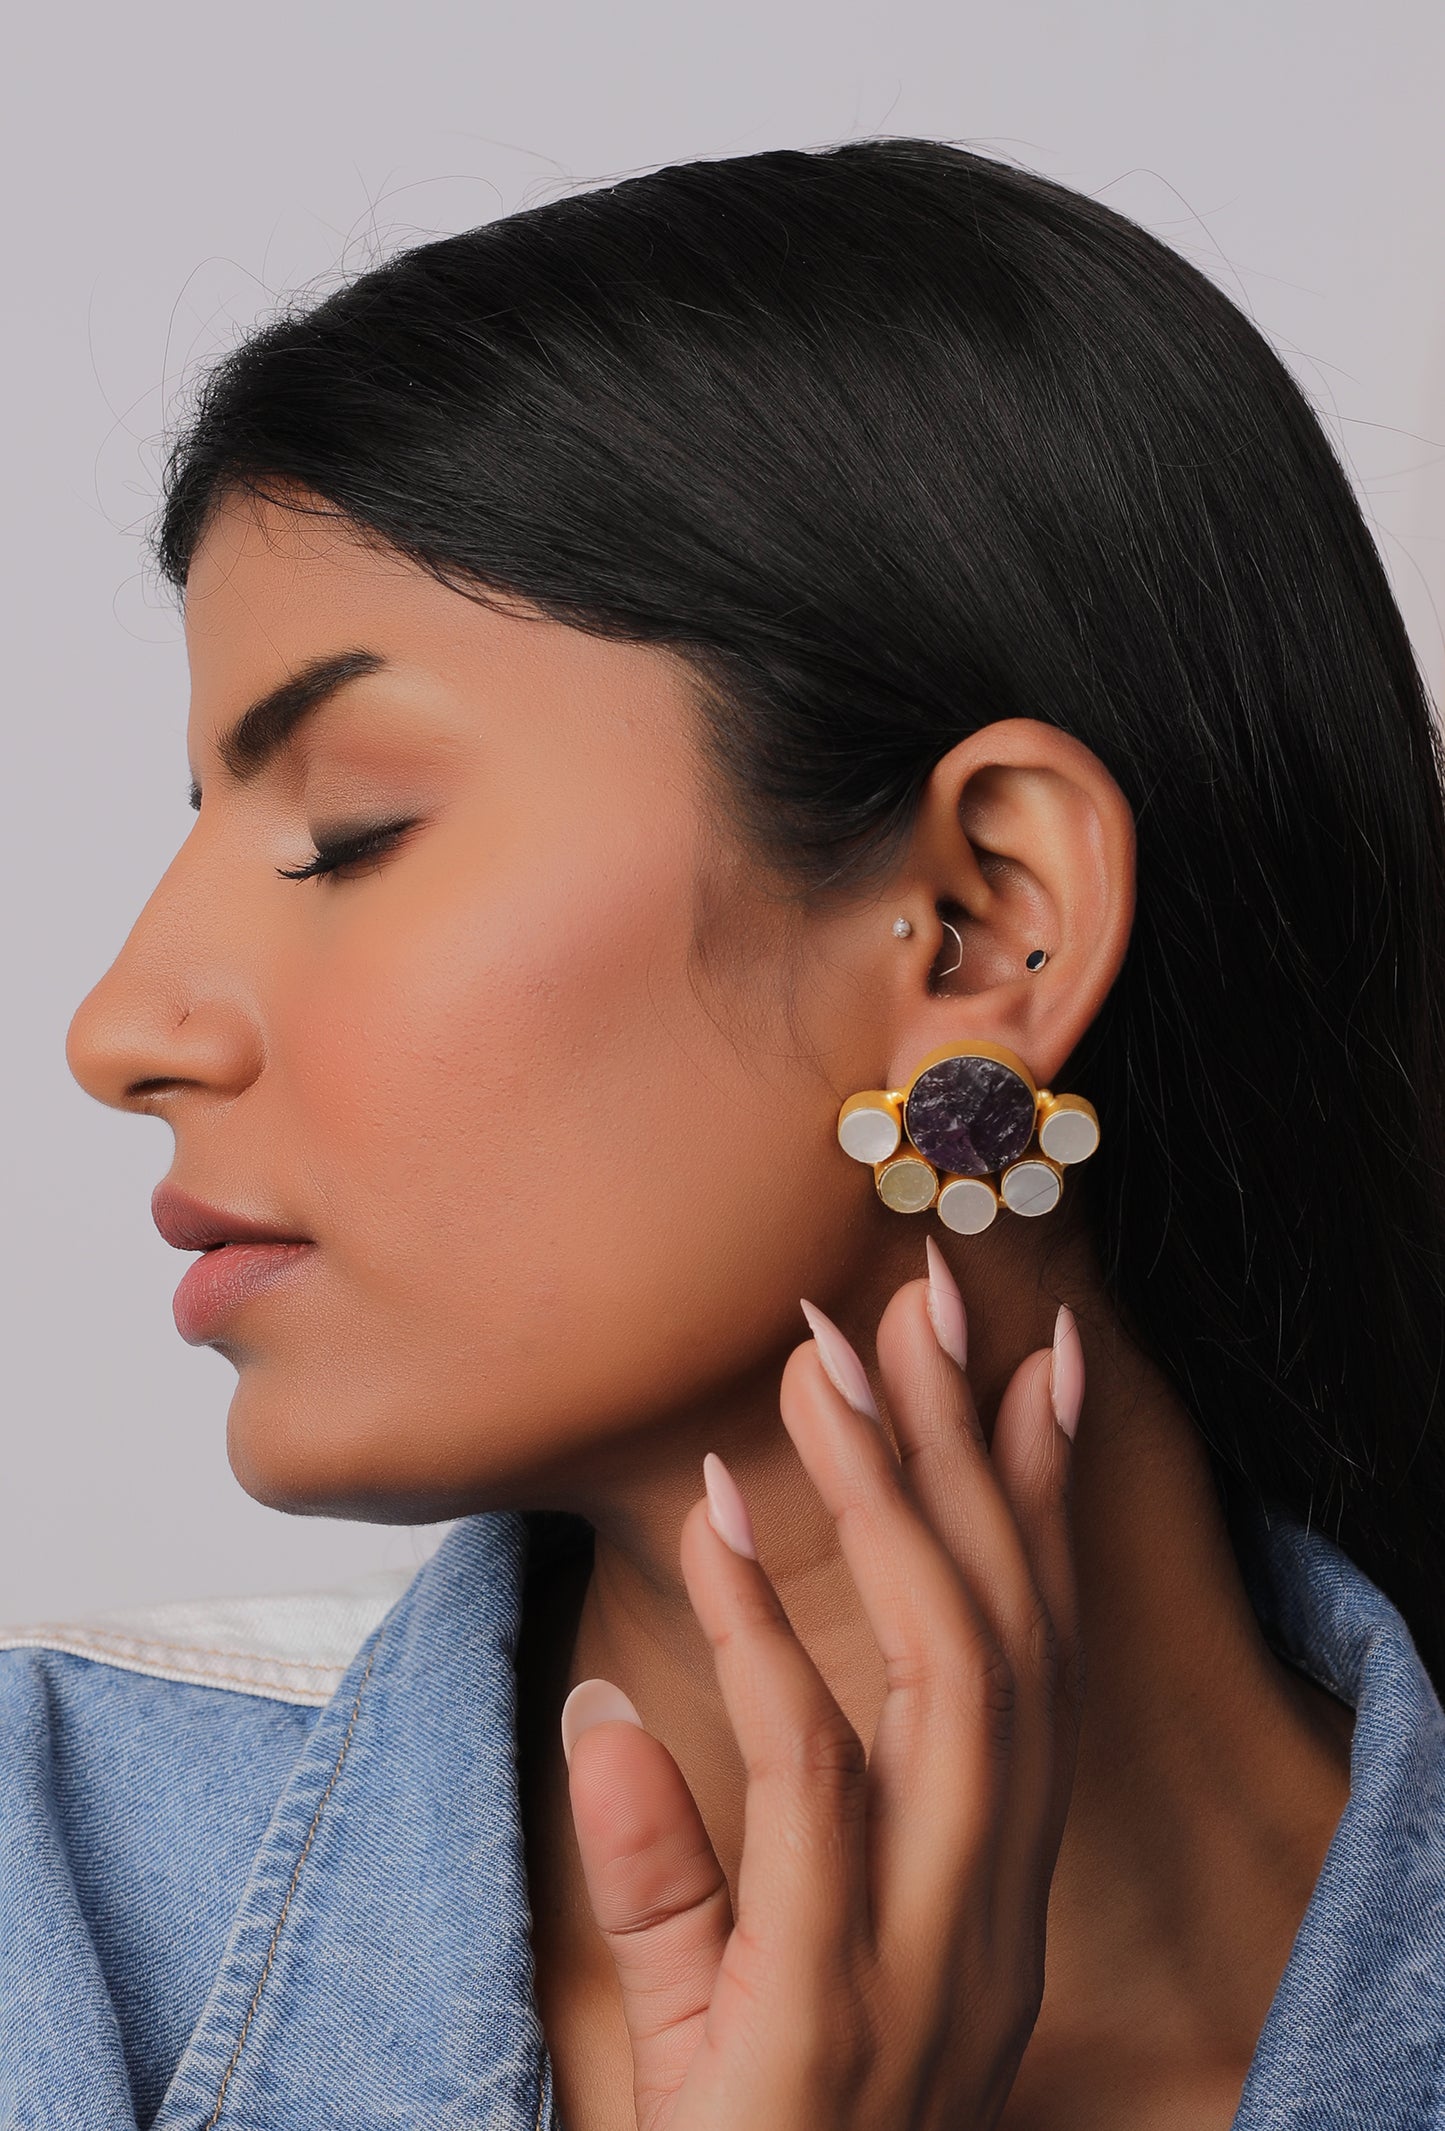 The Exquisite Solis Earrings